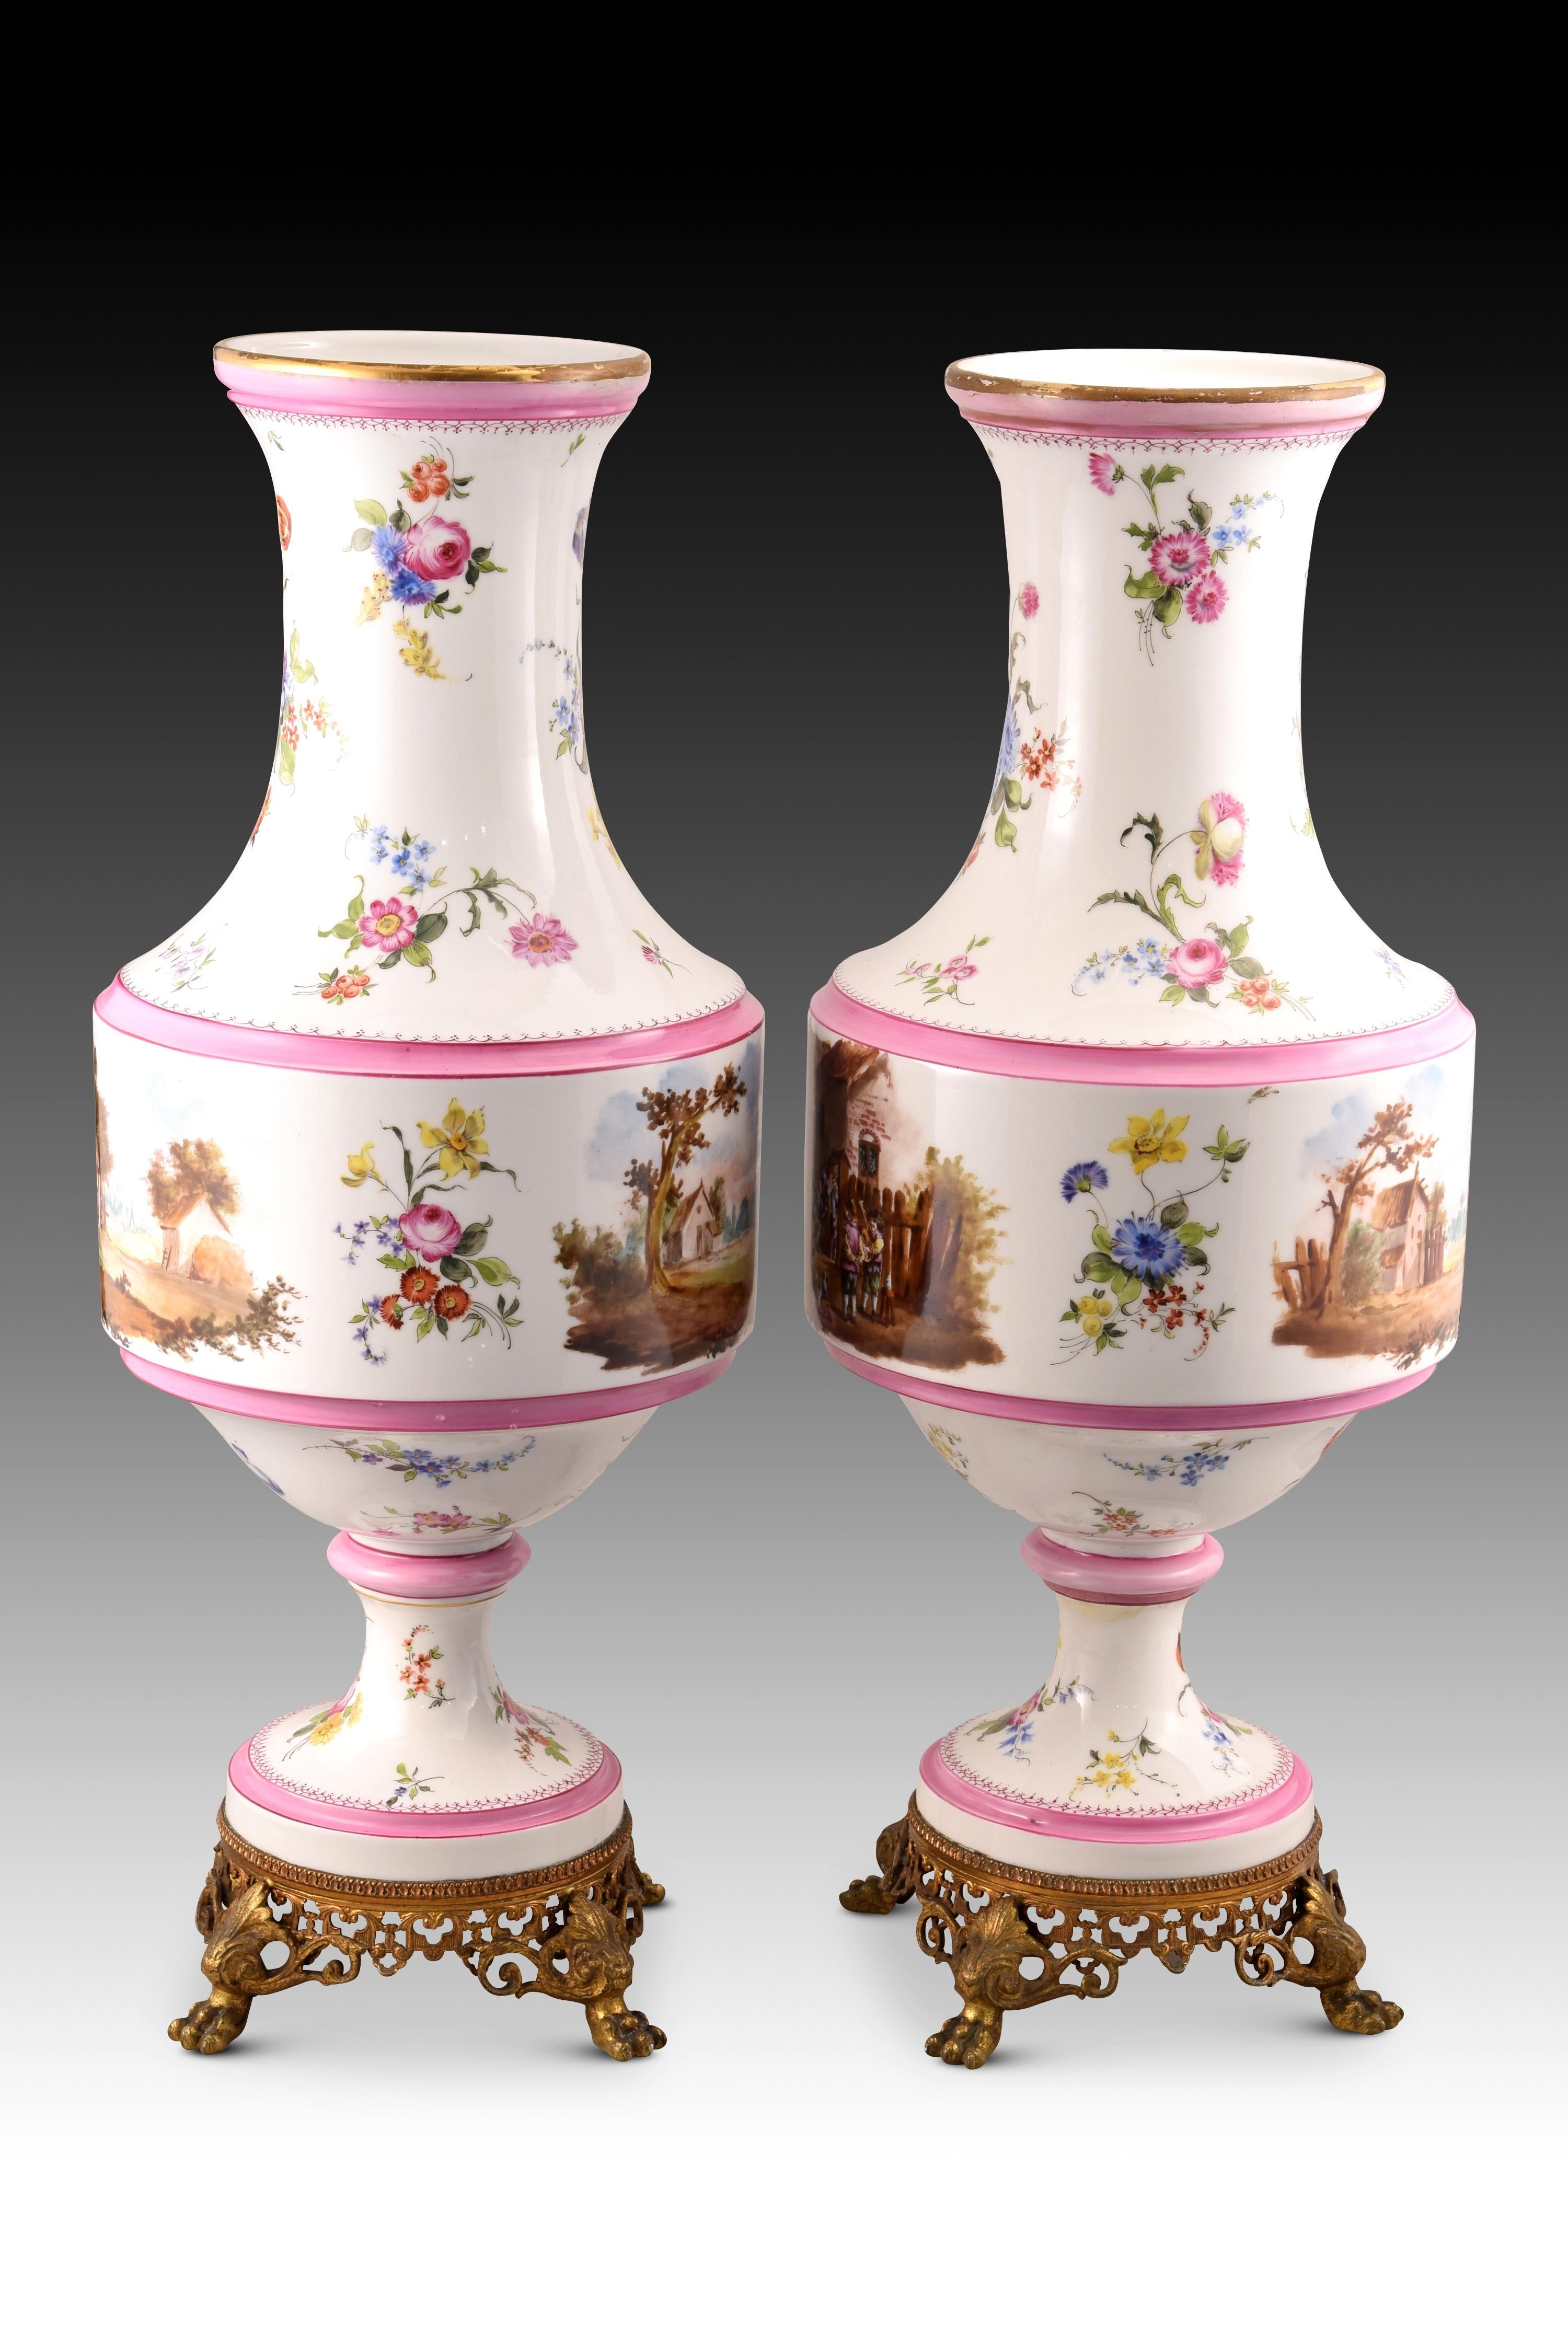 Pair of vases. Glazed porcelain, metal. XIX century. 
Pair of vases with a circular foot, a cylindrical body in the center and a long neck and mouth open towards the outside, decorated with bands in a pink tone, golden edges, grouped flowers and